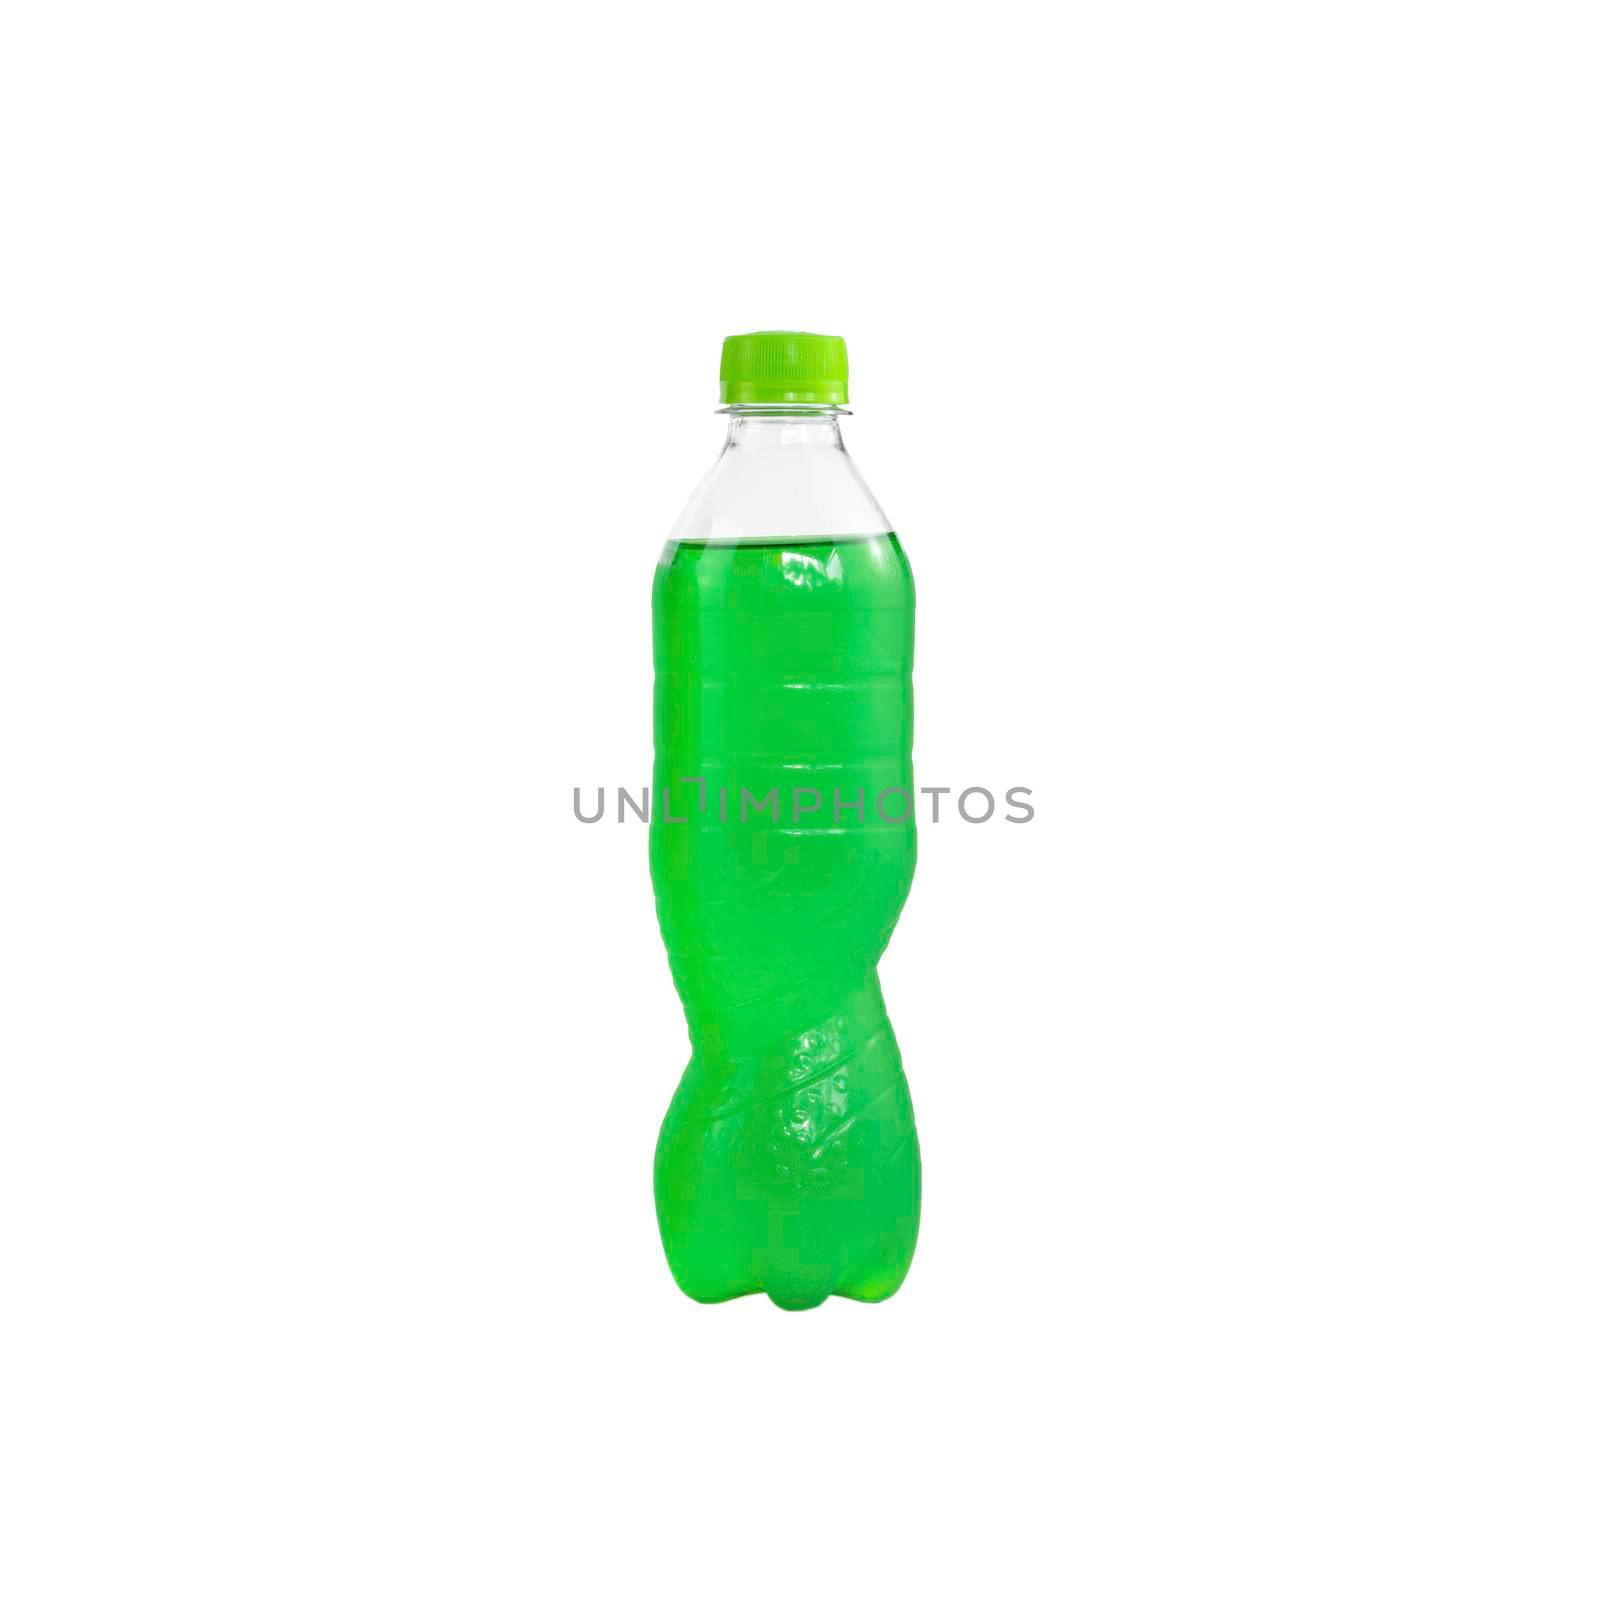 Green sparkling water in a plastic bottle isolated on white background by wattanaphob